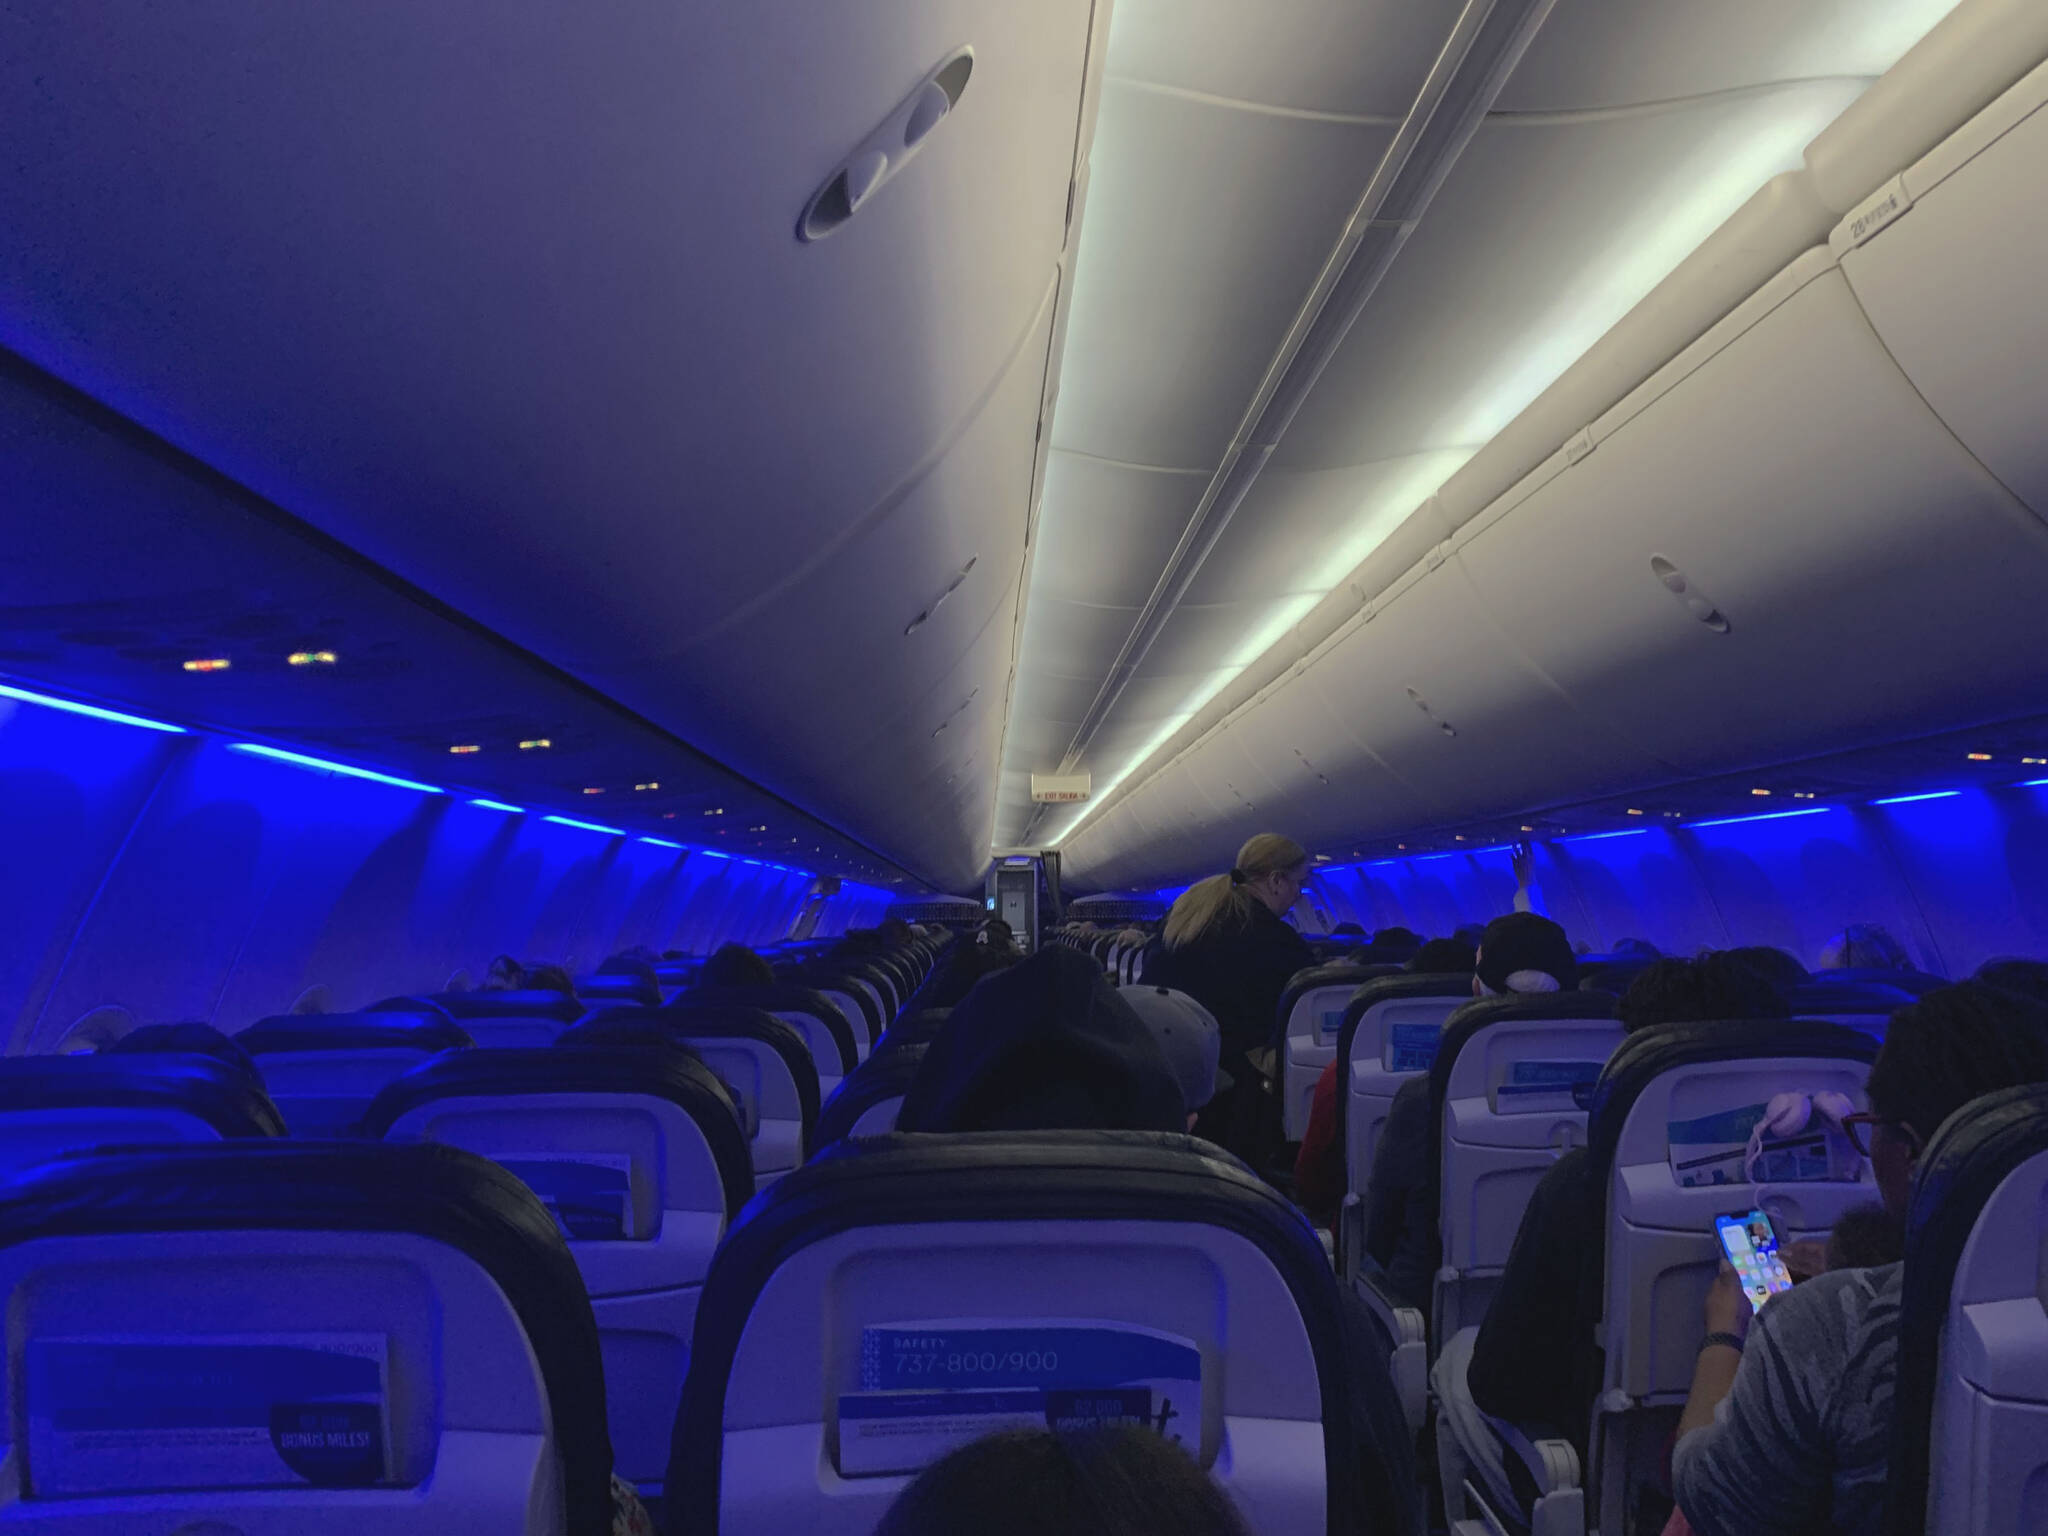 Passengers prepare for takeoff onboard a Seattle-bound Alaska Airlines flight departing from Dallas on Thursday, Jan. 5, 2023 in Dallas, Texas. (Ashlyn O'Hara/Peninsula Clarion0